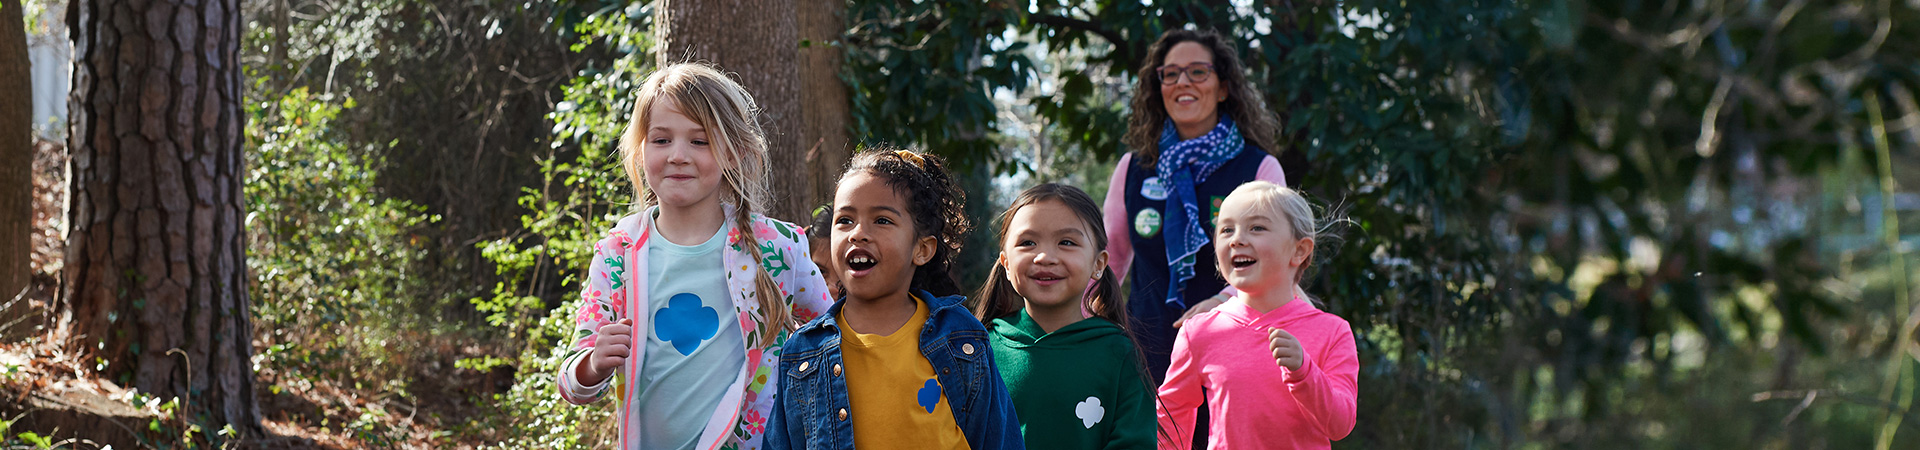  group of Girl Scouts walking outdoors with adult volunteer 